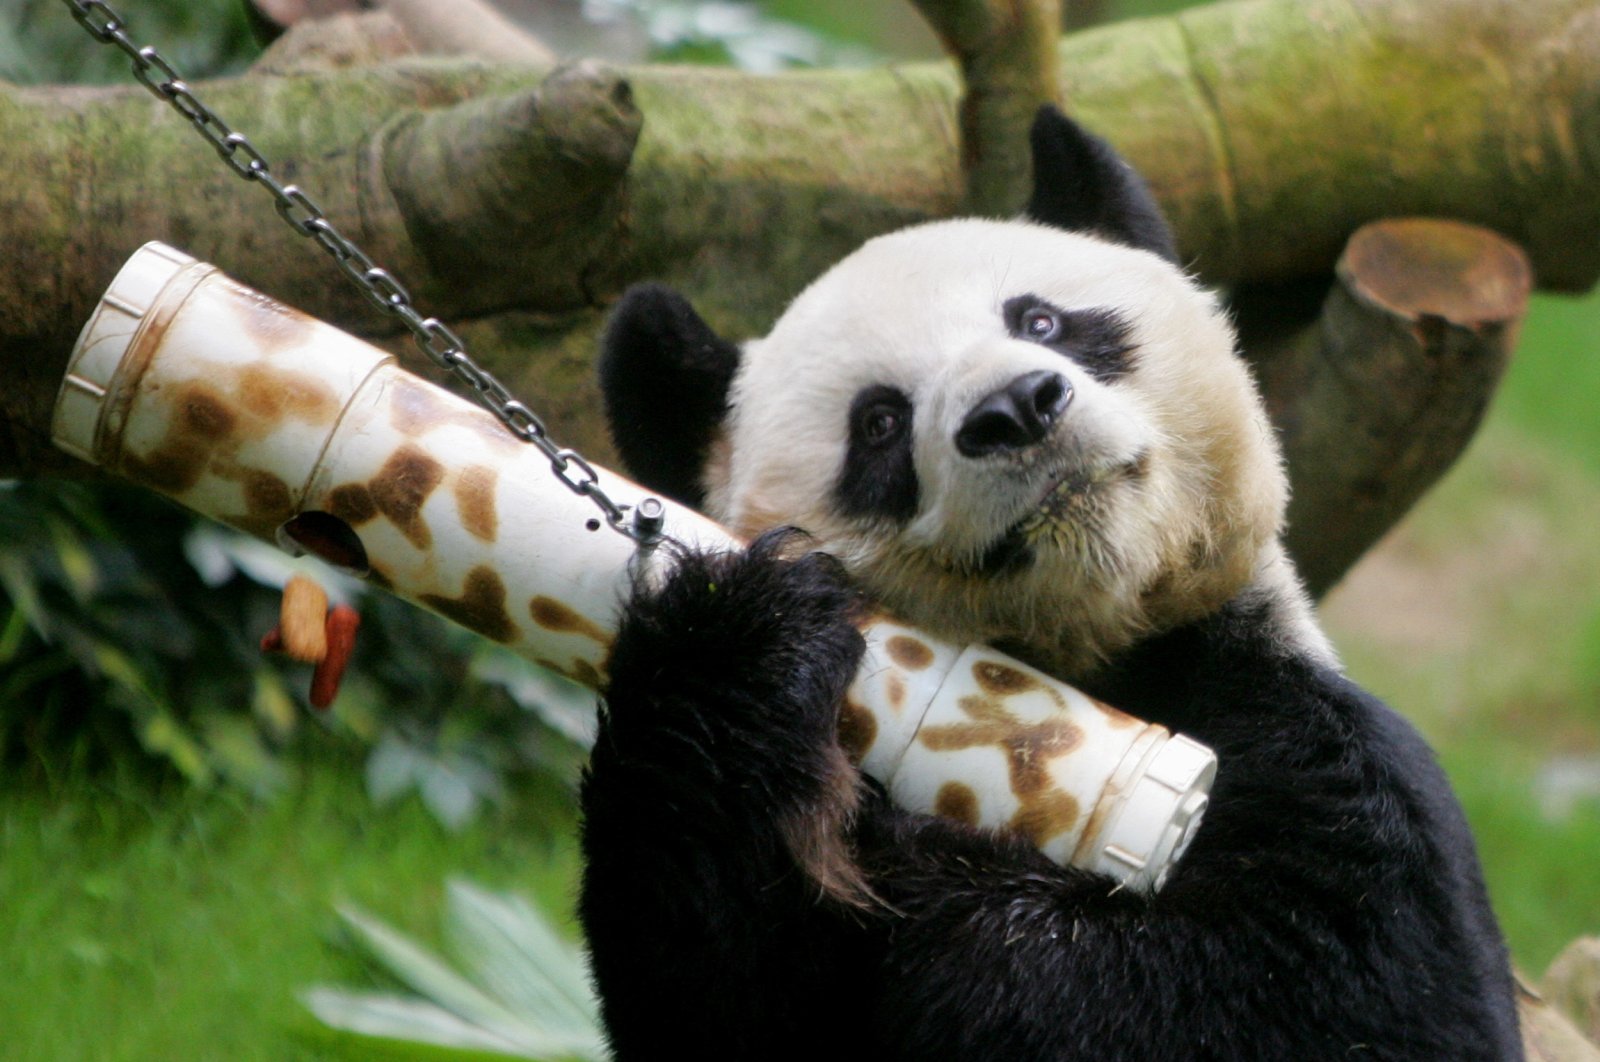 Male giant panda An An shakes a &quot;puzzle feeder&quot; at the Ocean Park in Hong Kong, March 9, 2006. (REUTERS File Photo)